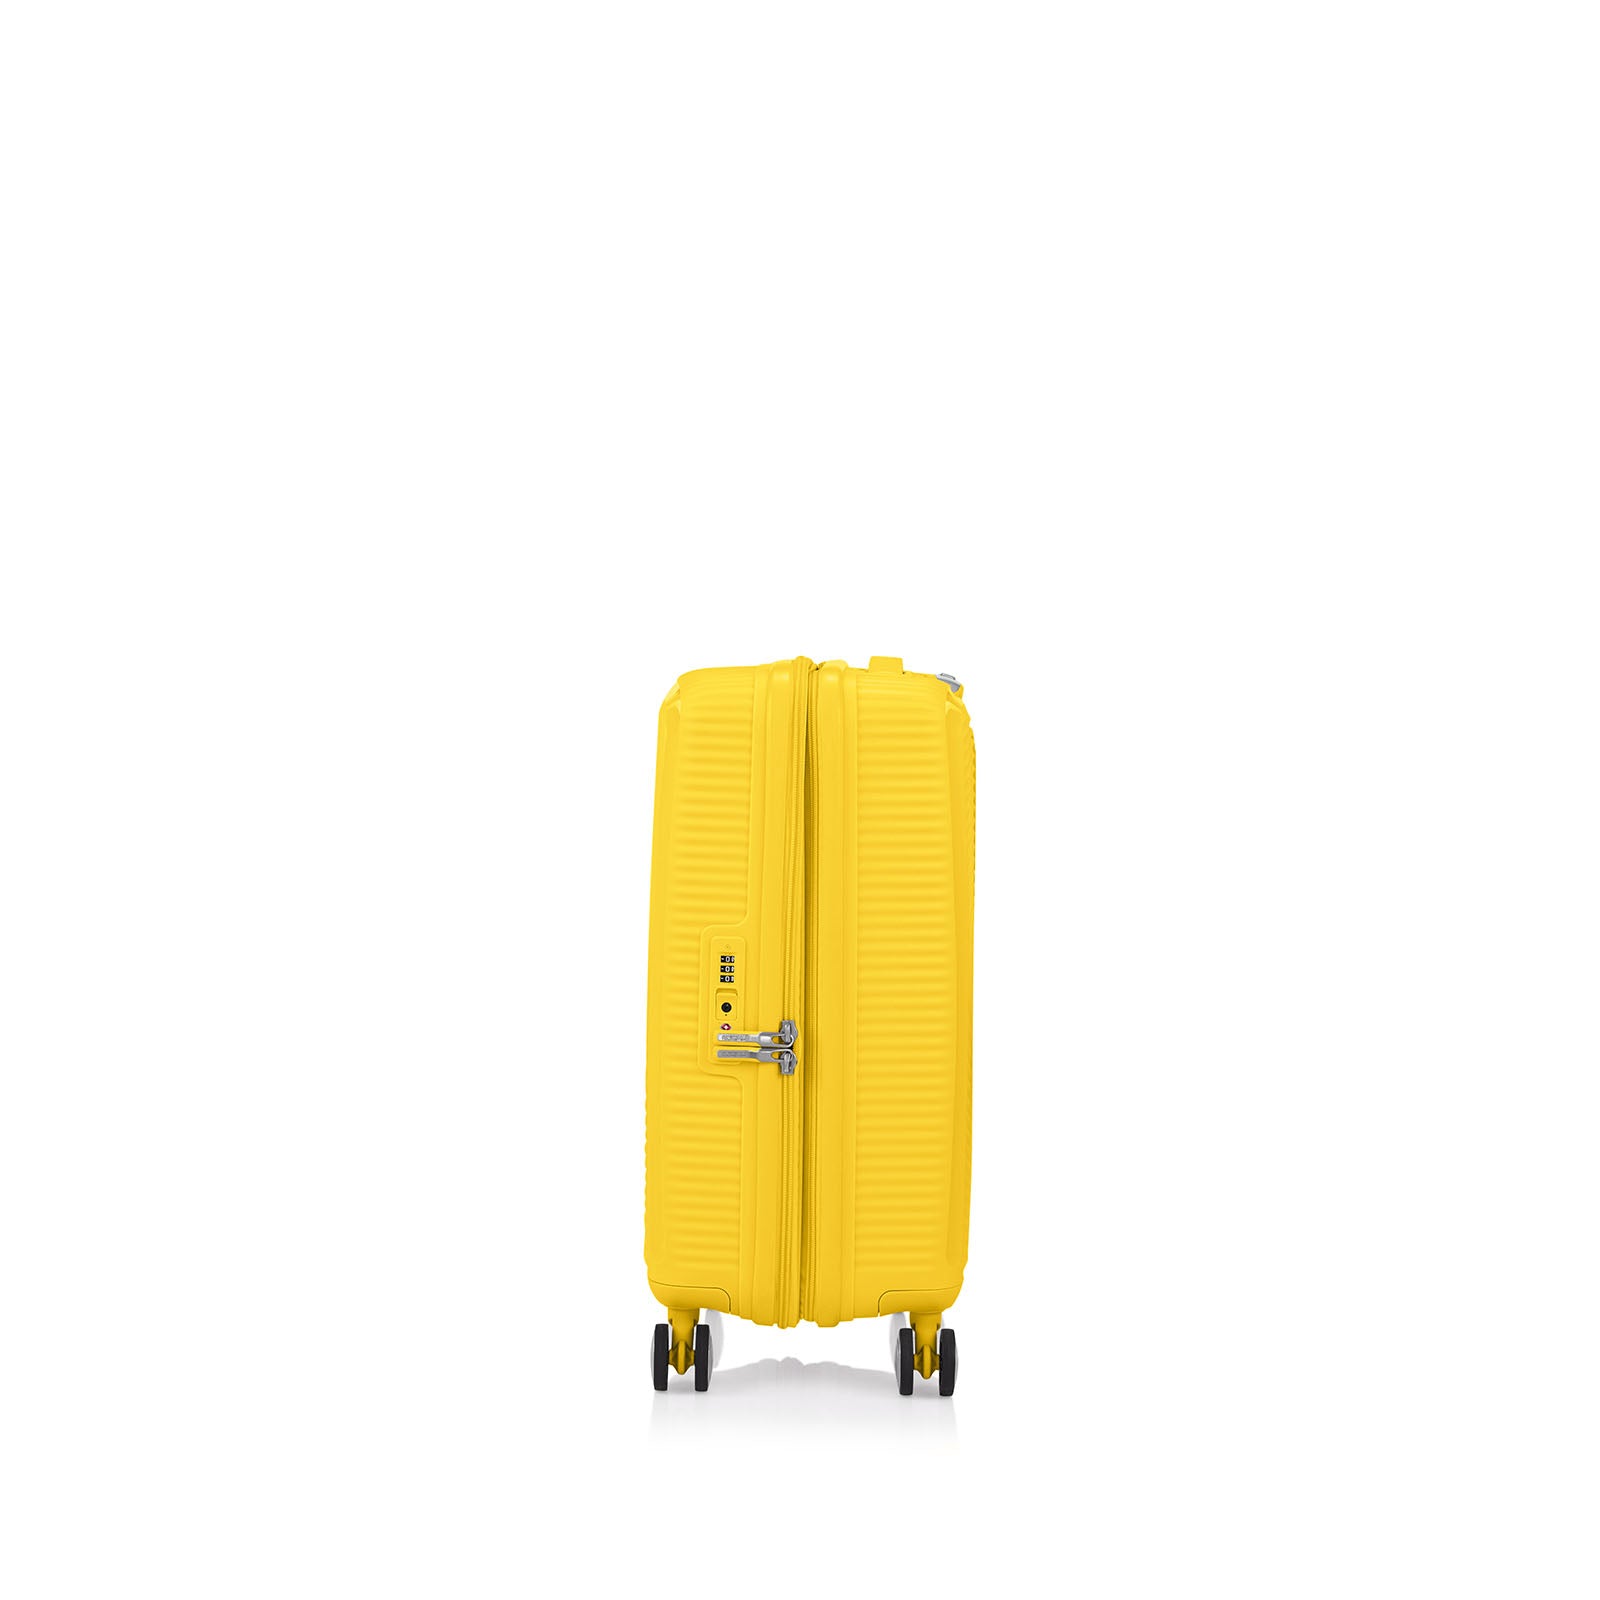 American-Tourister-Curio-2-55cm-Carry-On-Suitcase-Golden-Yellow-Side